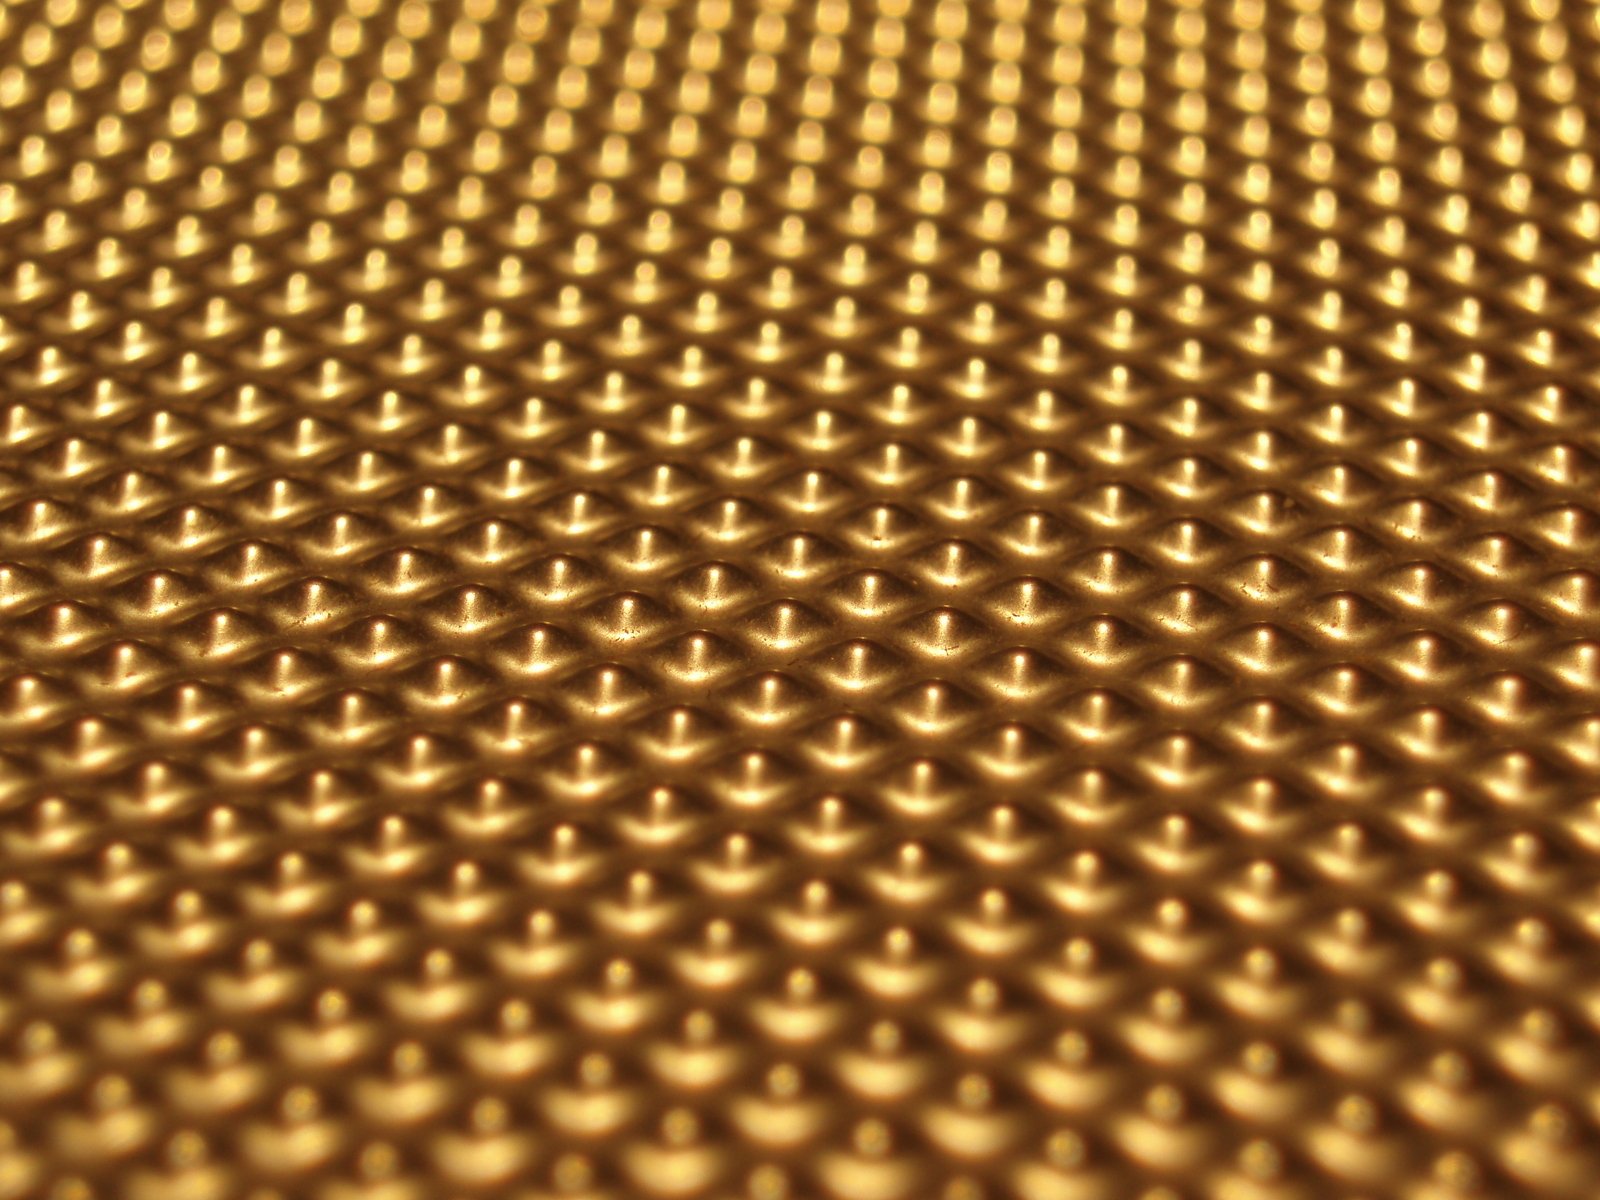 the pattern on the surface of a golden metal plate